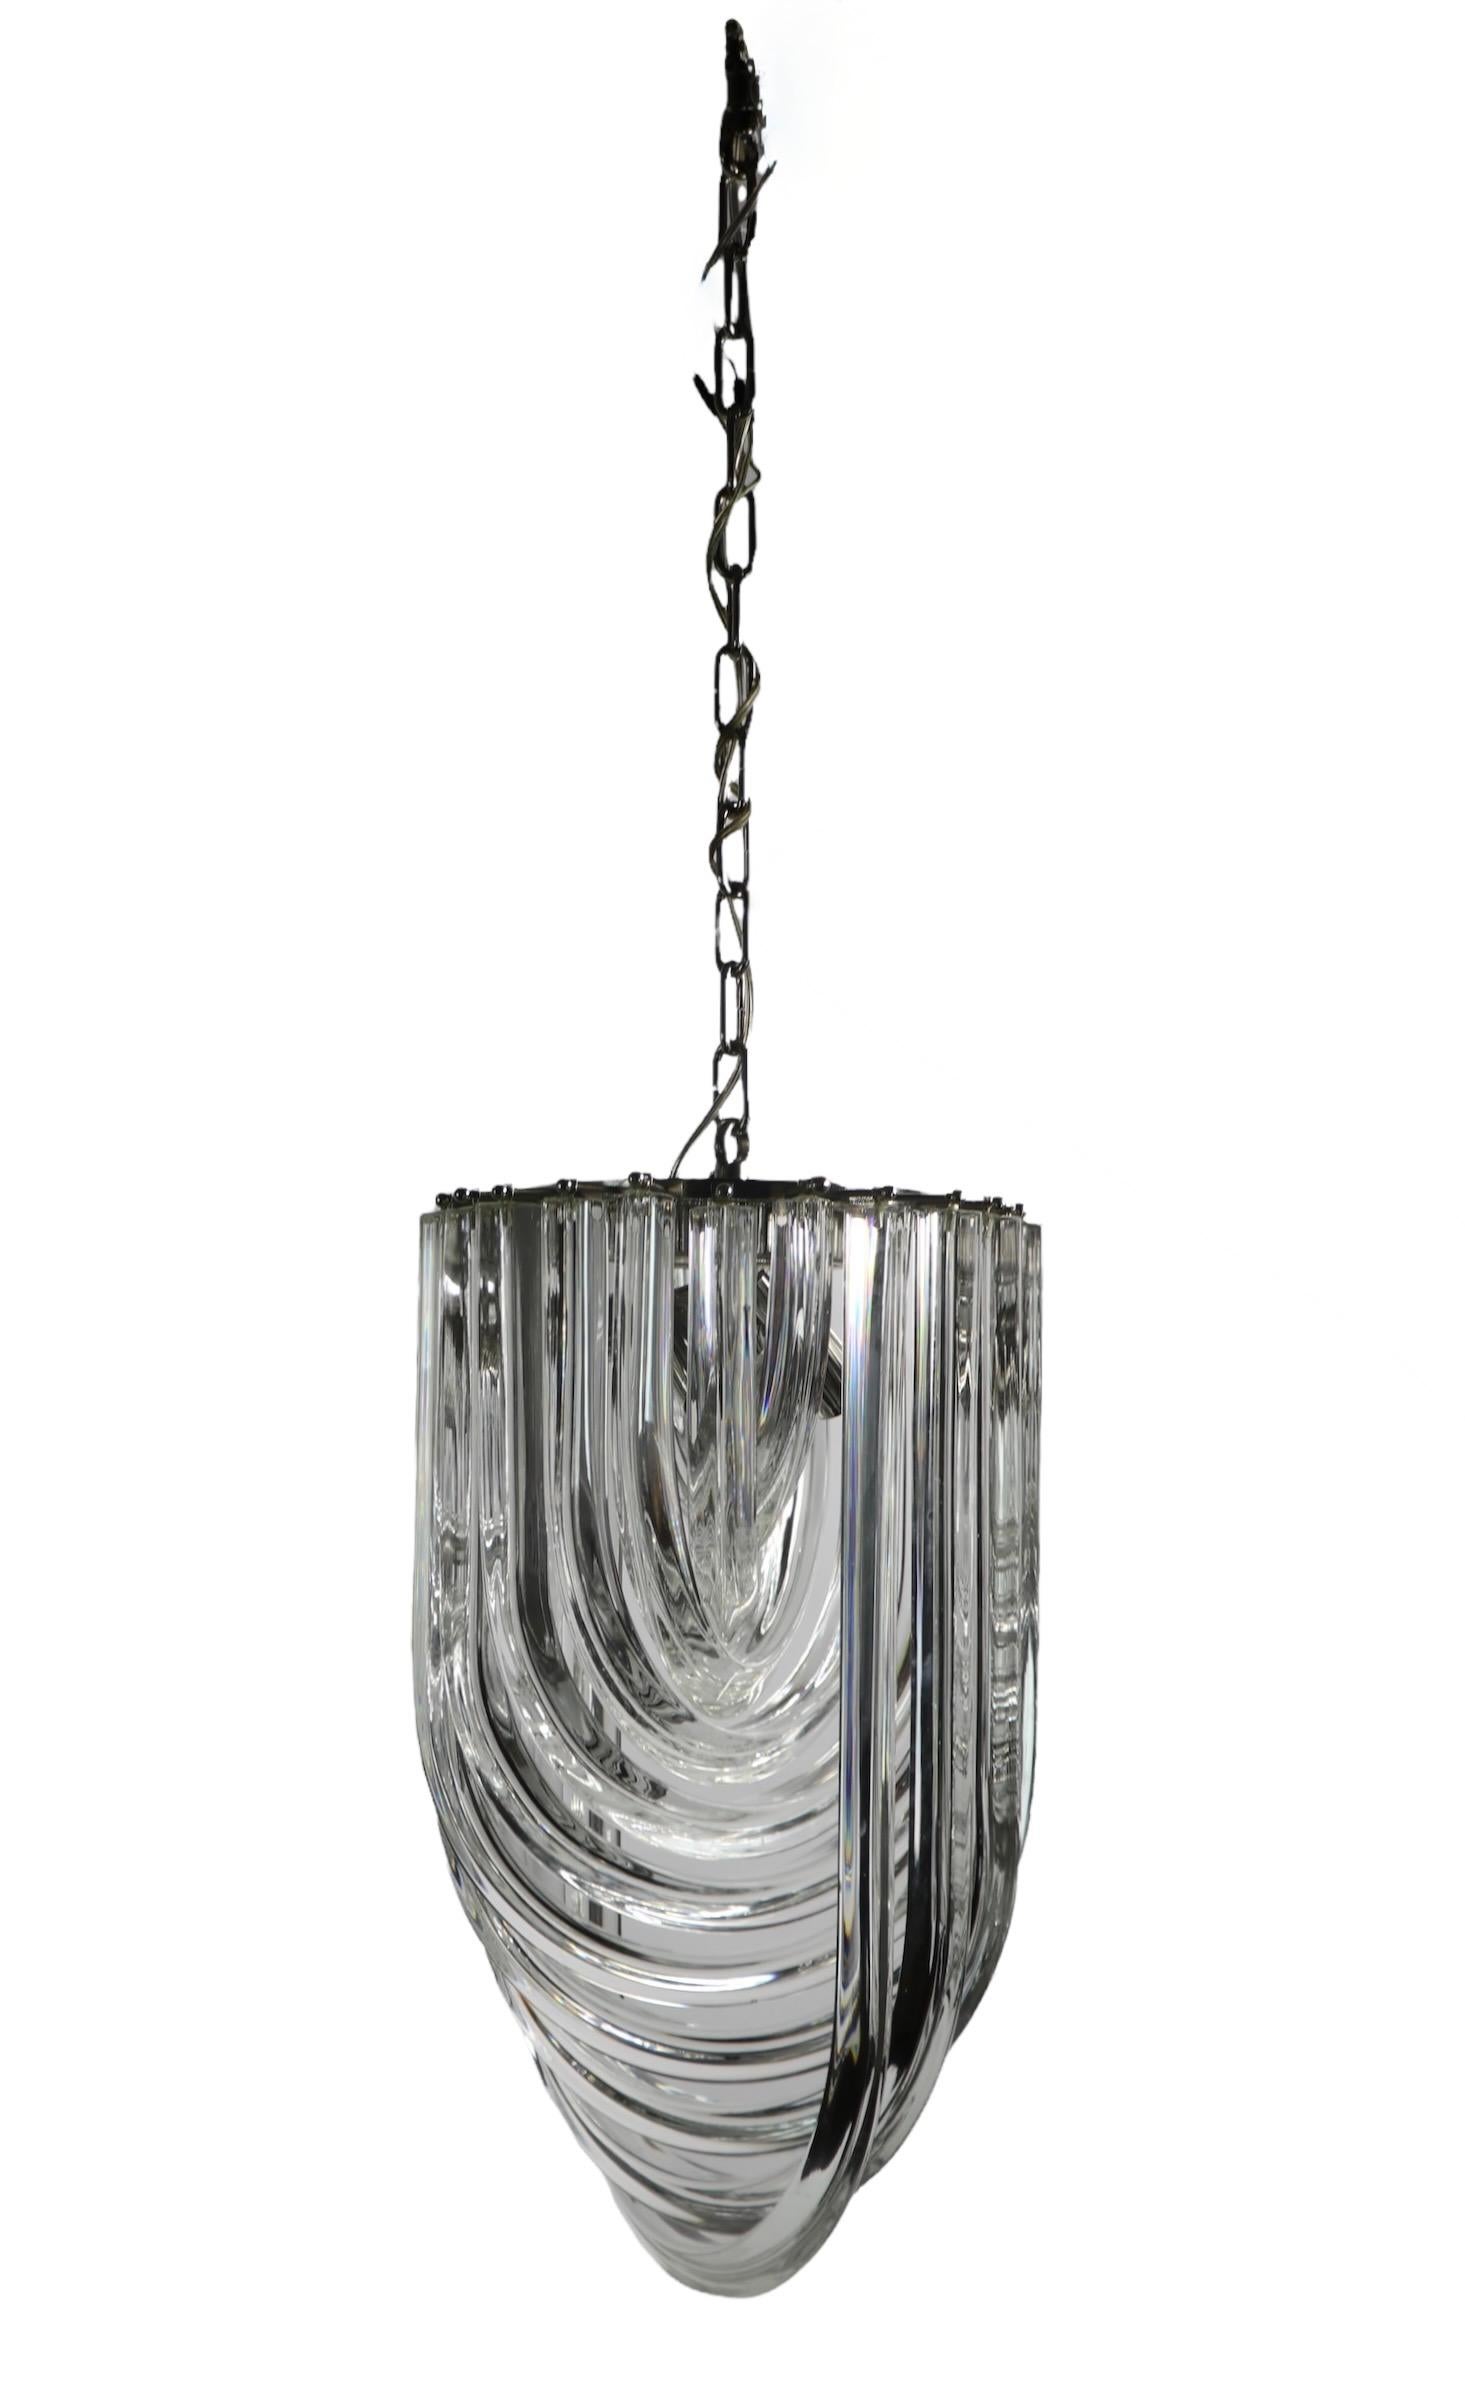 20th Century Curved Glass Loop Curvati Chandeliers Attributed to Carlo Nason 3 Available For Sale